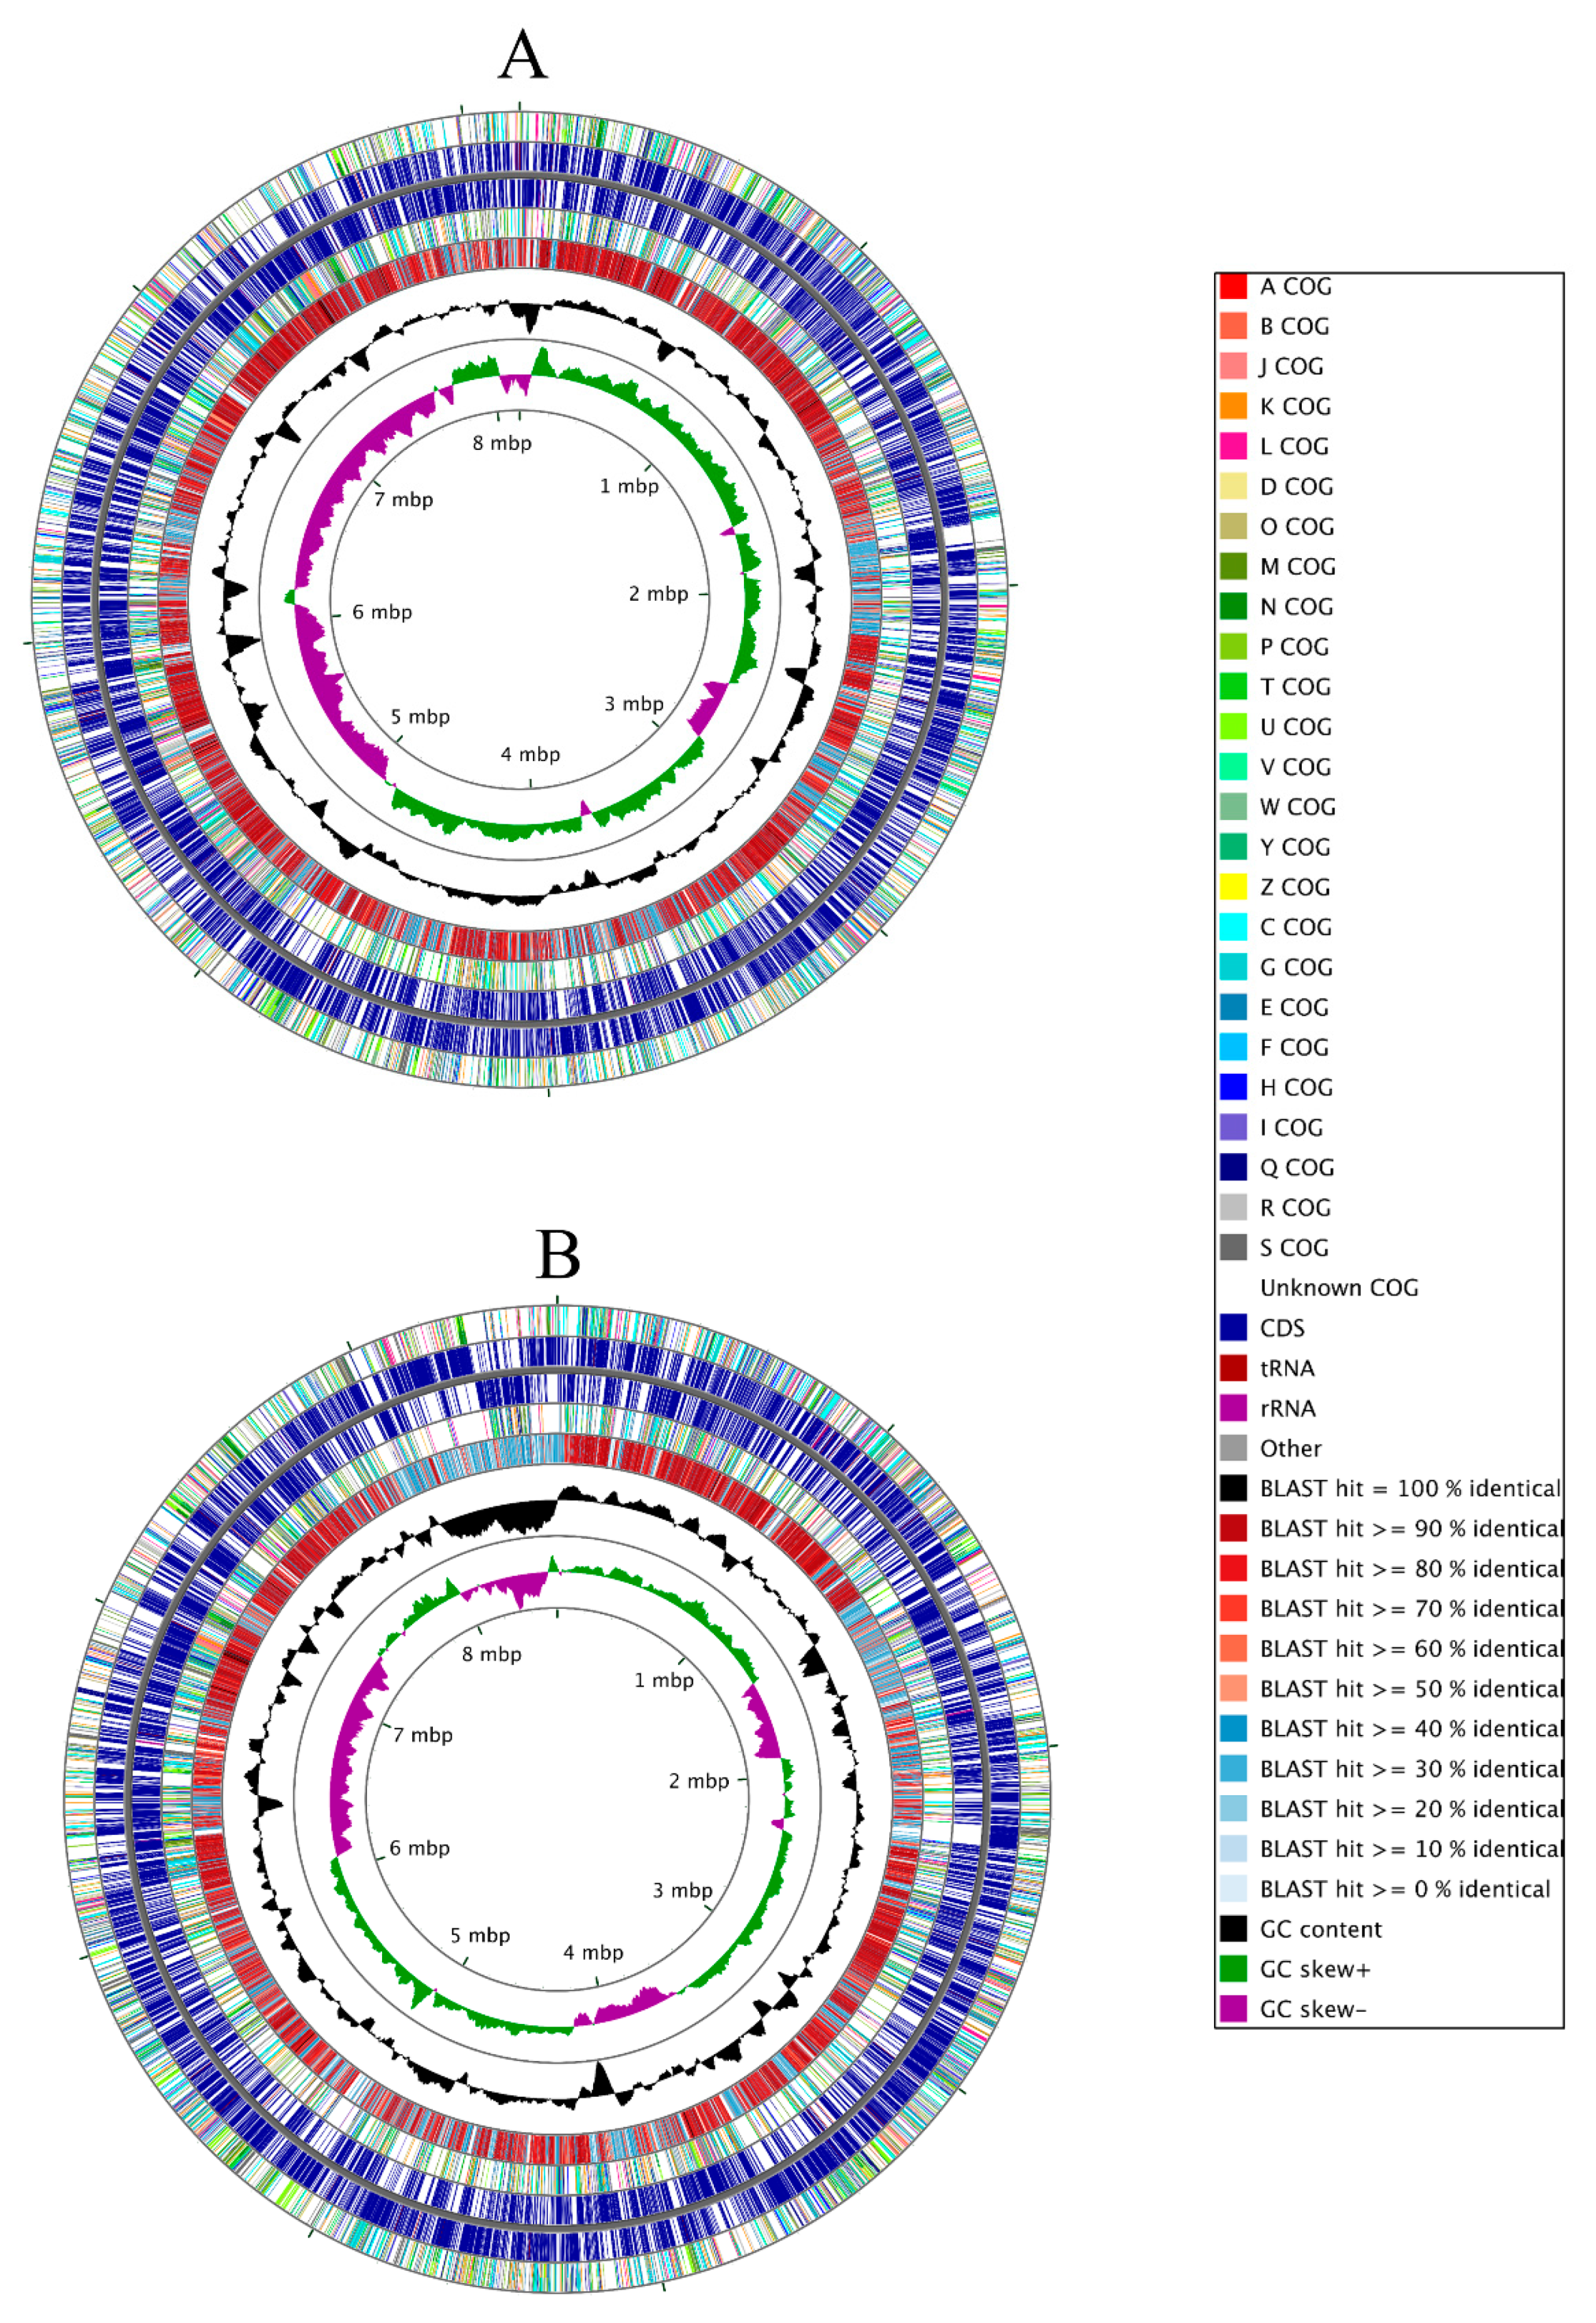 Cells Free Full Text Proteogenomic Analysis Of Burkholderia Species Strains 25 And 46 Isolated From Uraniferous Soils Reveals Multiple Mechanisms To Cope With Uranium Stress Html